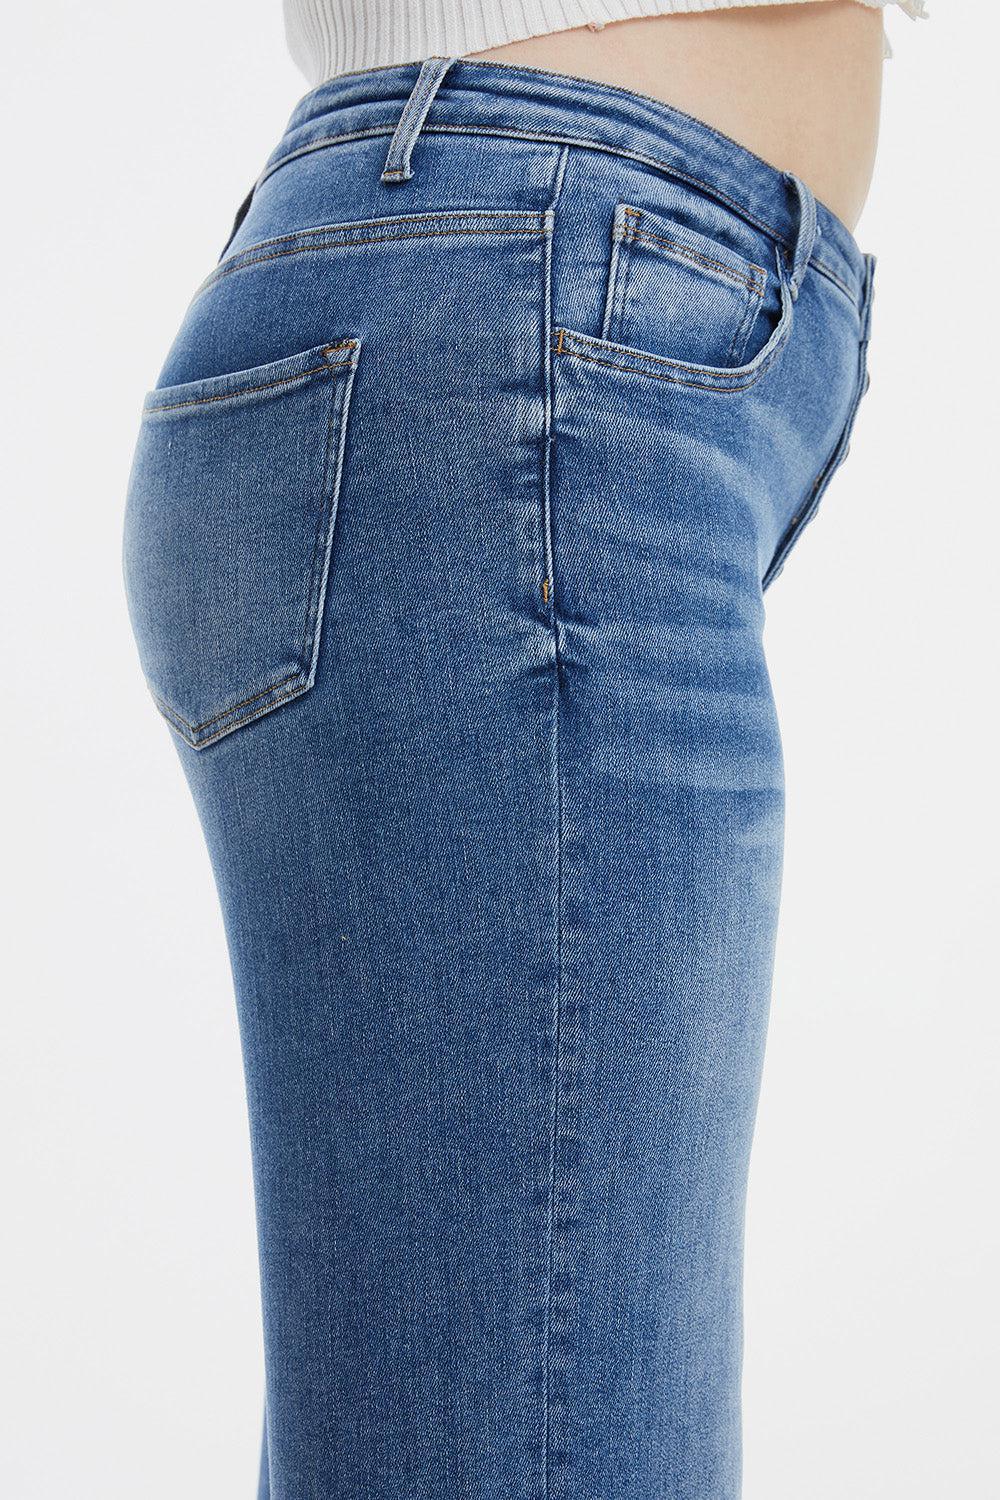 a close up of a woman's butt wearing jeans